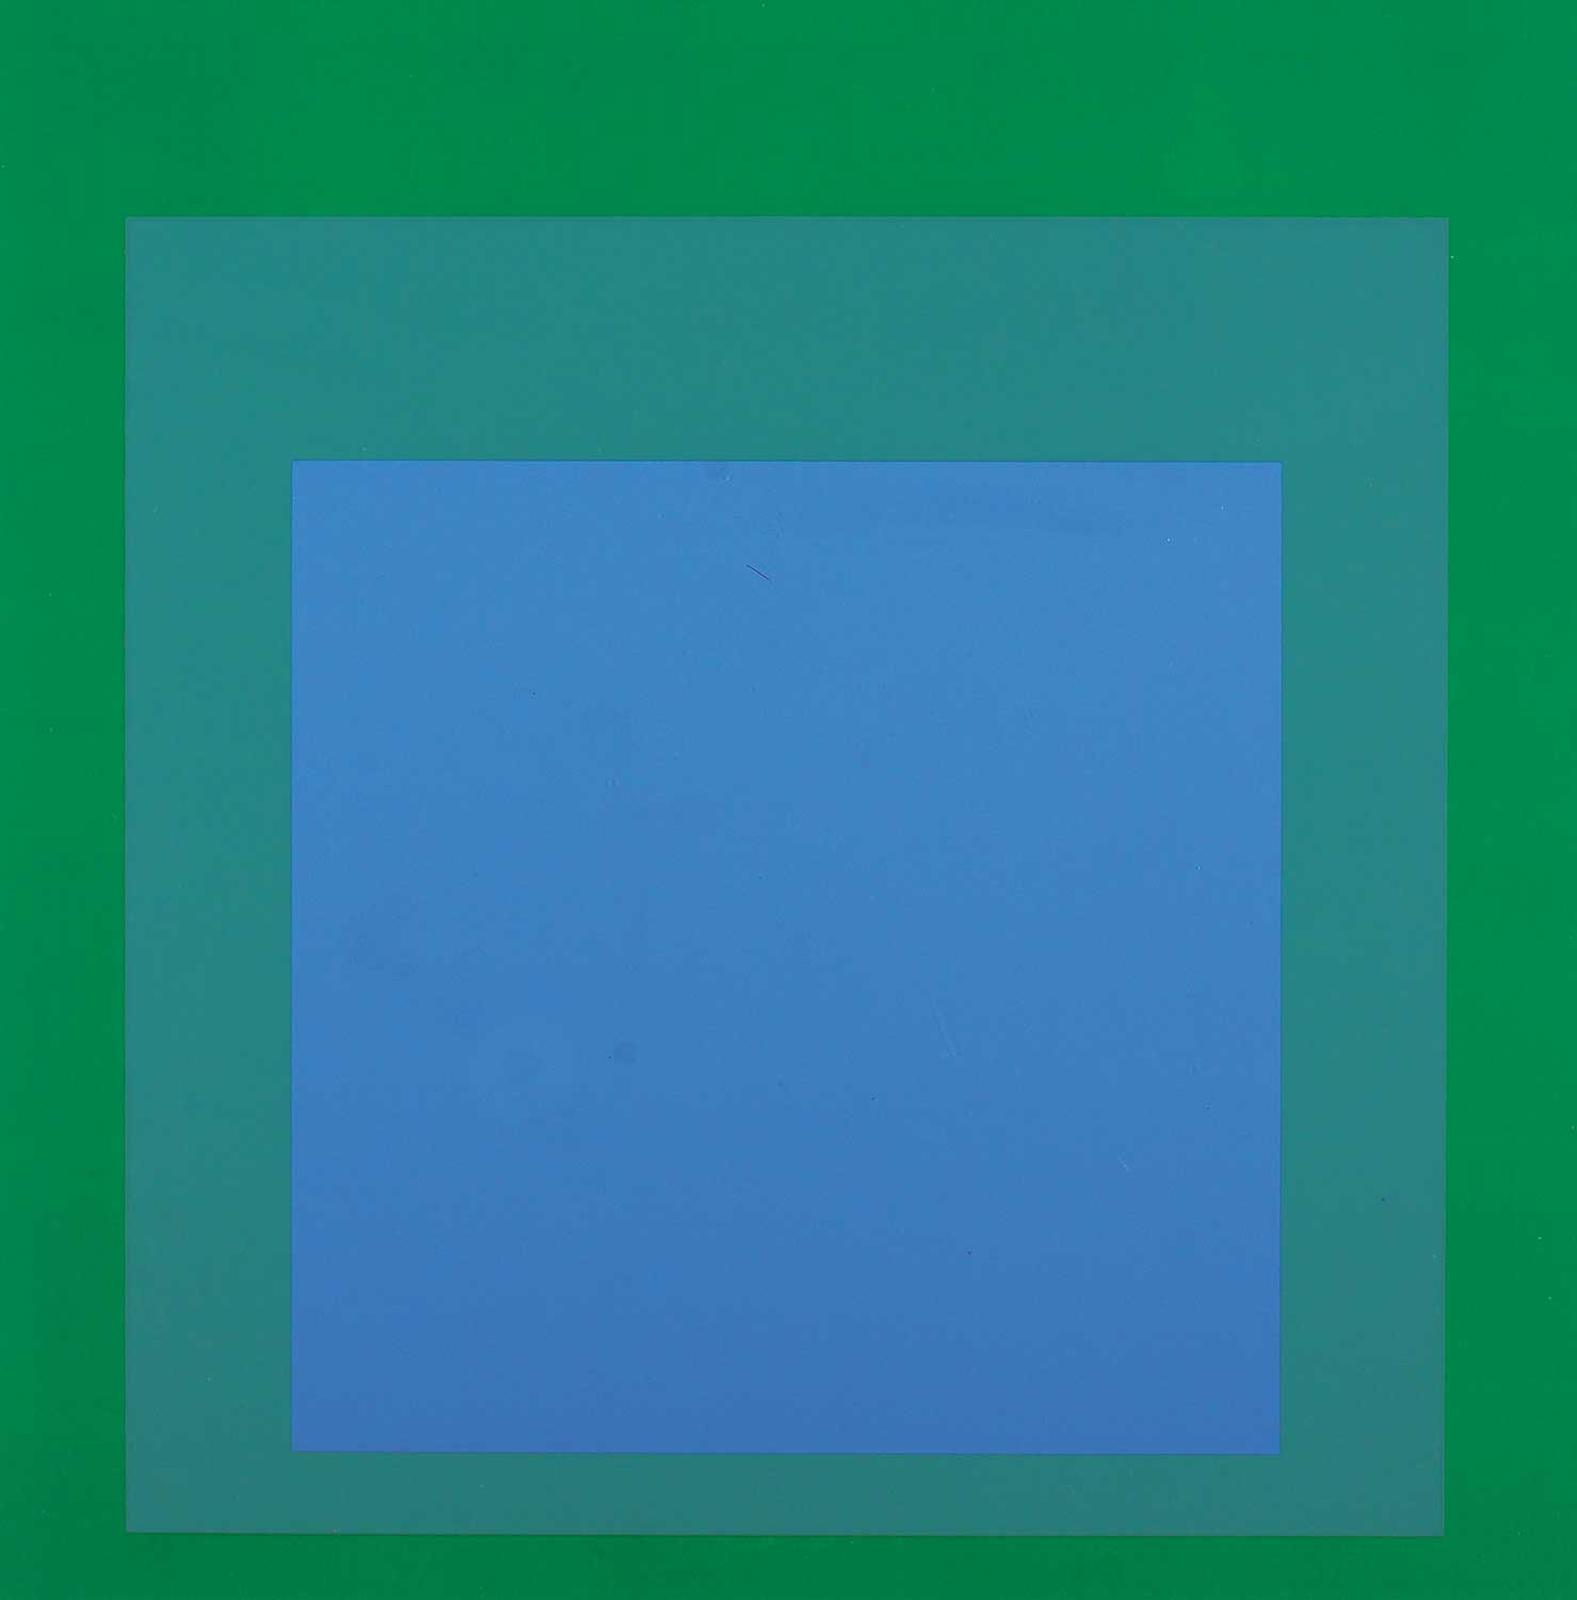 Josef Albers (1888-1976) - Untitled - Blue Square on Greens